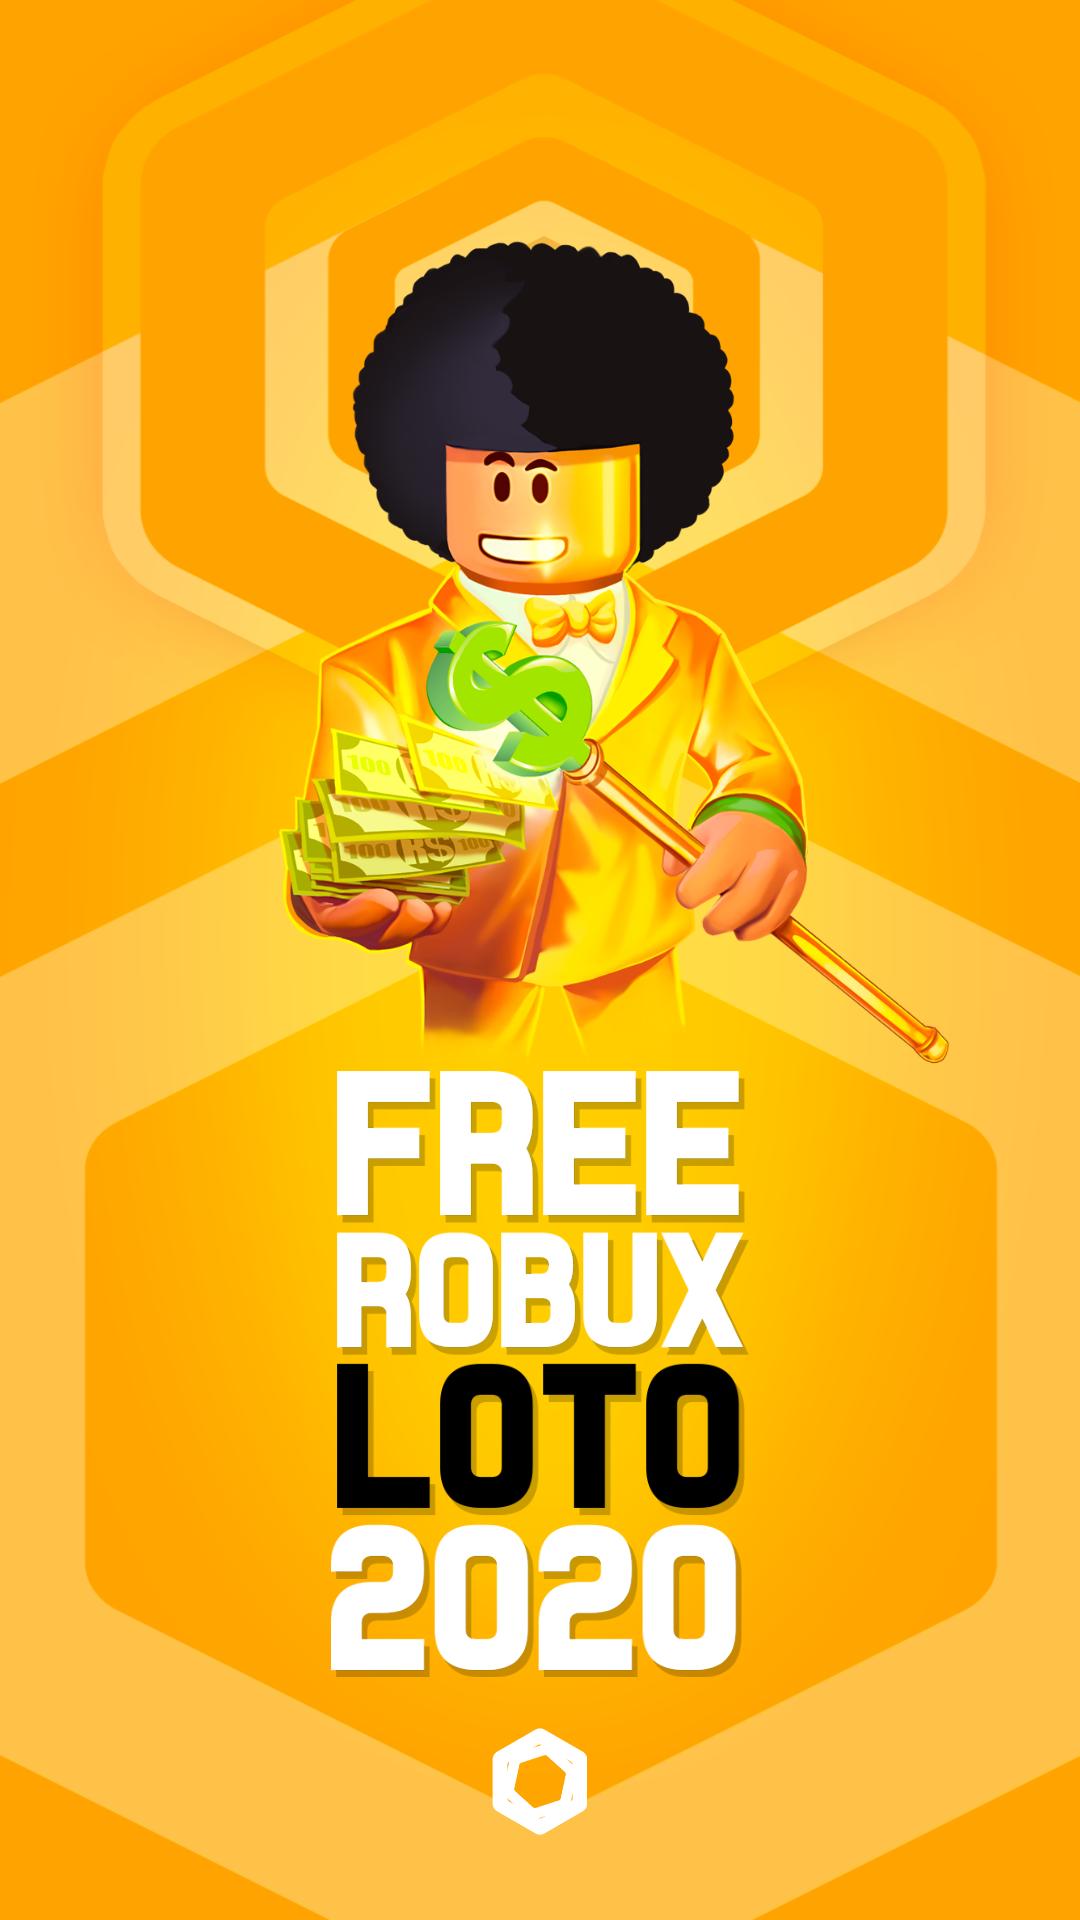 Free Robux Loto 2020 For Android Apk Download - free robux loto 2020 2 0 apk download com zohal free robux loto2020 casinogame apk free